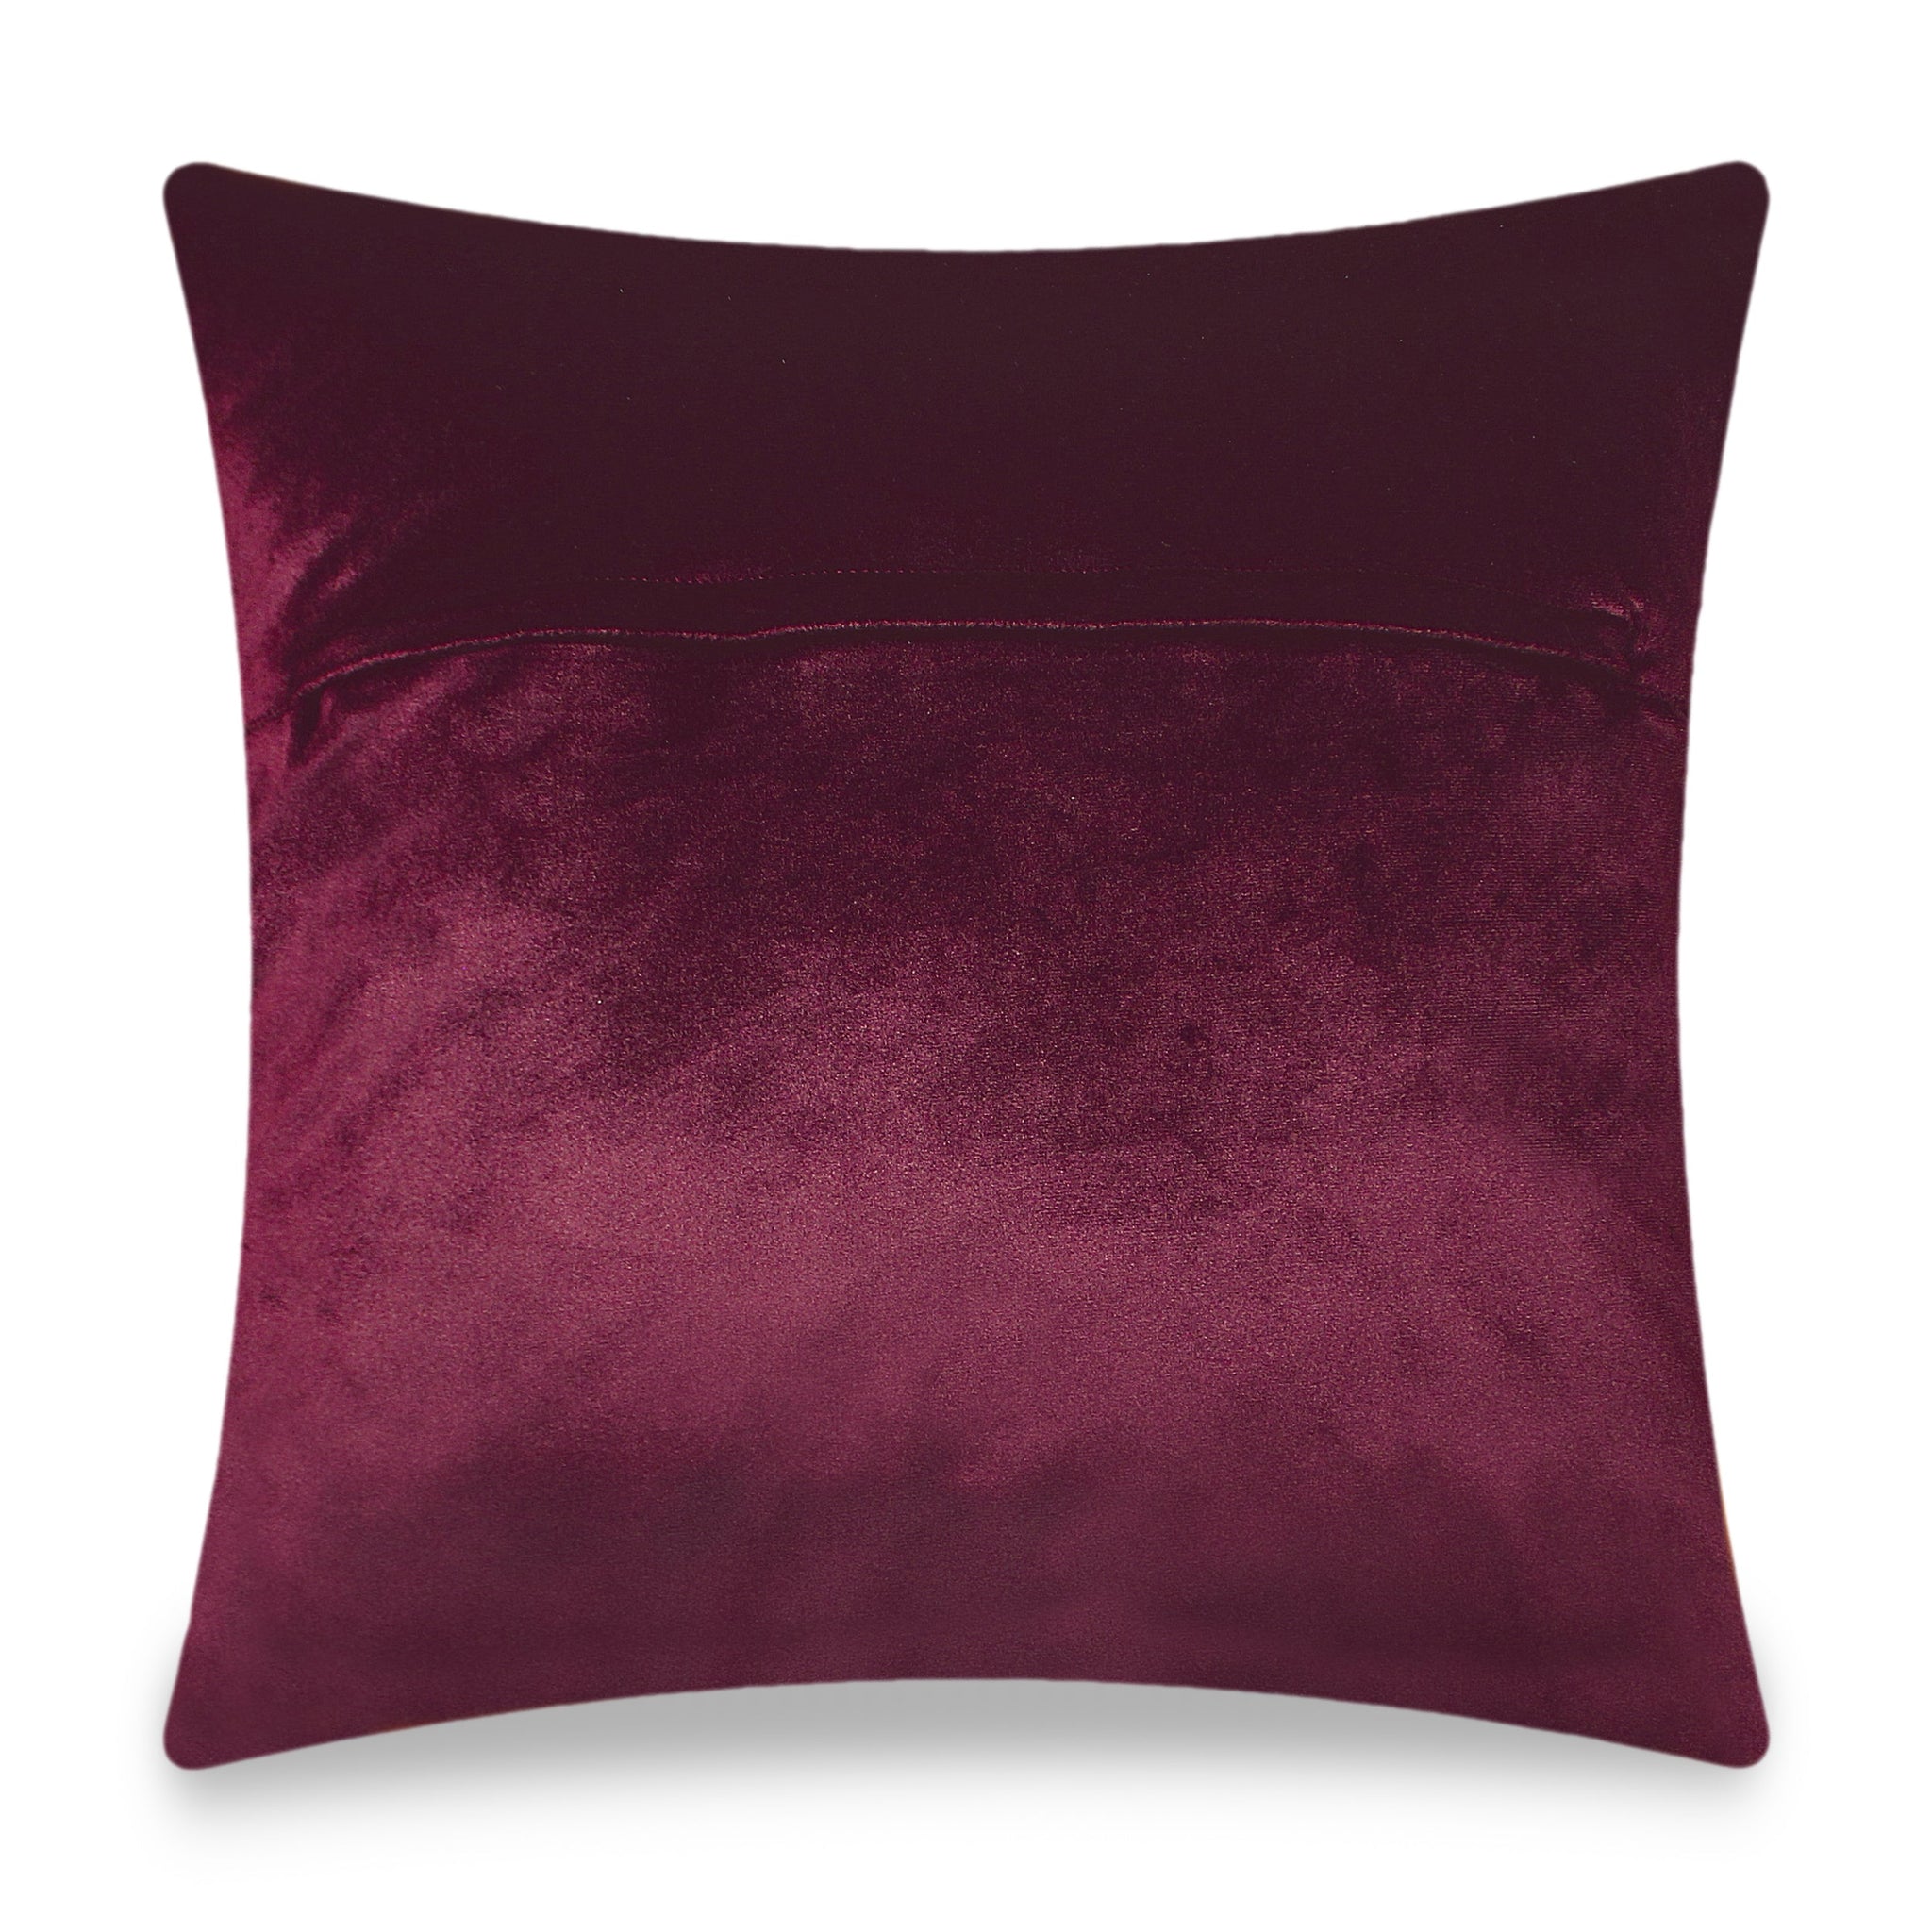 Fuschia Velvet Cushion Cover Classic Baroque Style Decorative pillowcase Traditional Floral Motif Décor Throw Pillow for Sofa Chair Bedroom Living Room 45x45cm(18x18 Inches)